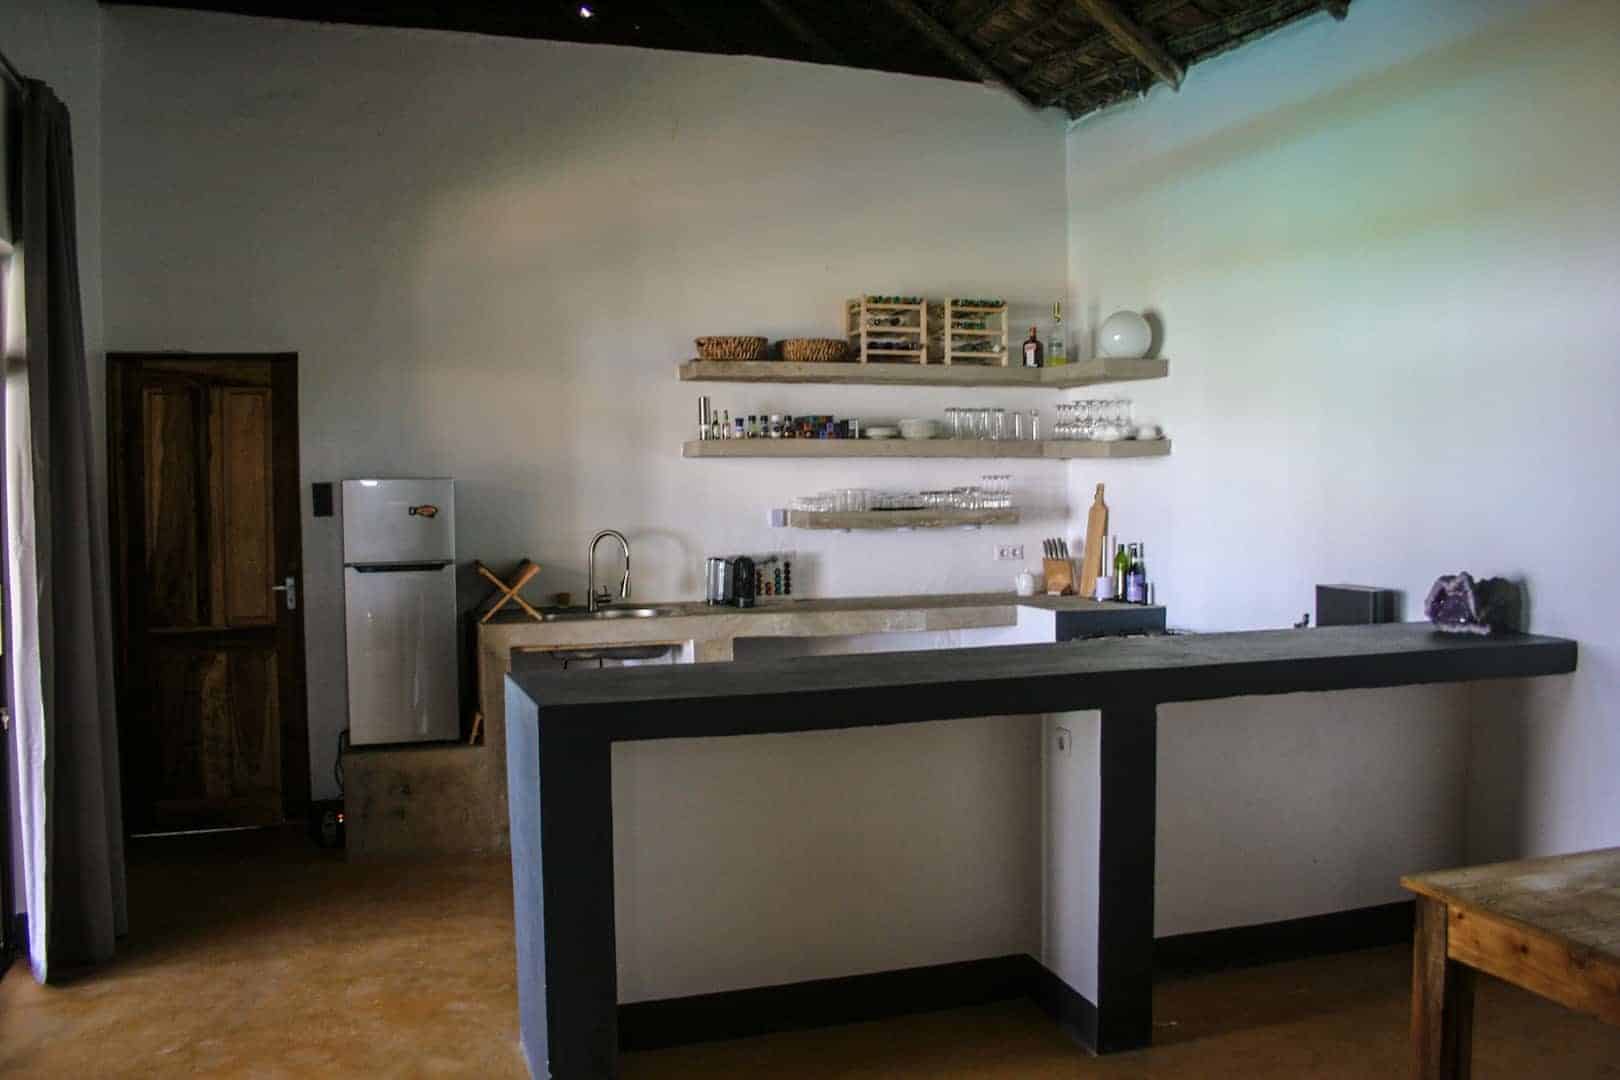 Kitchen with refrigerator and bar